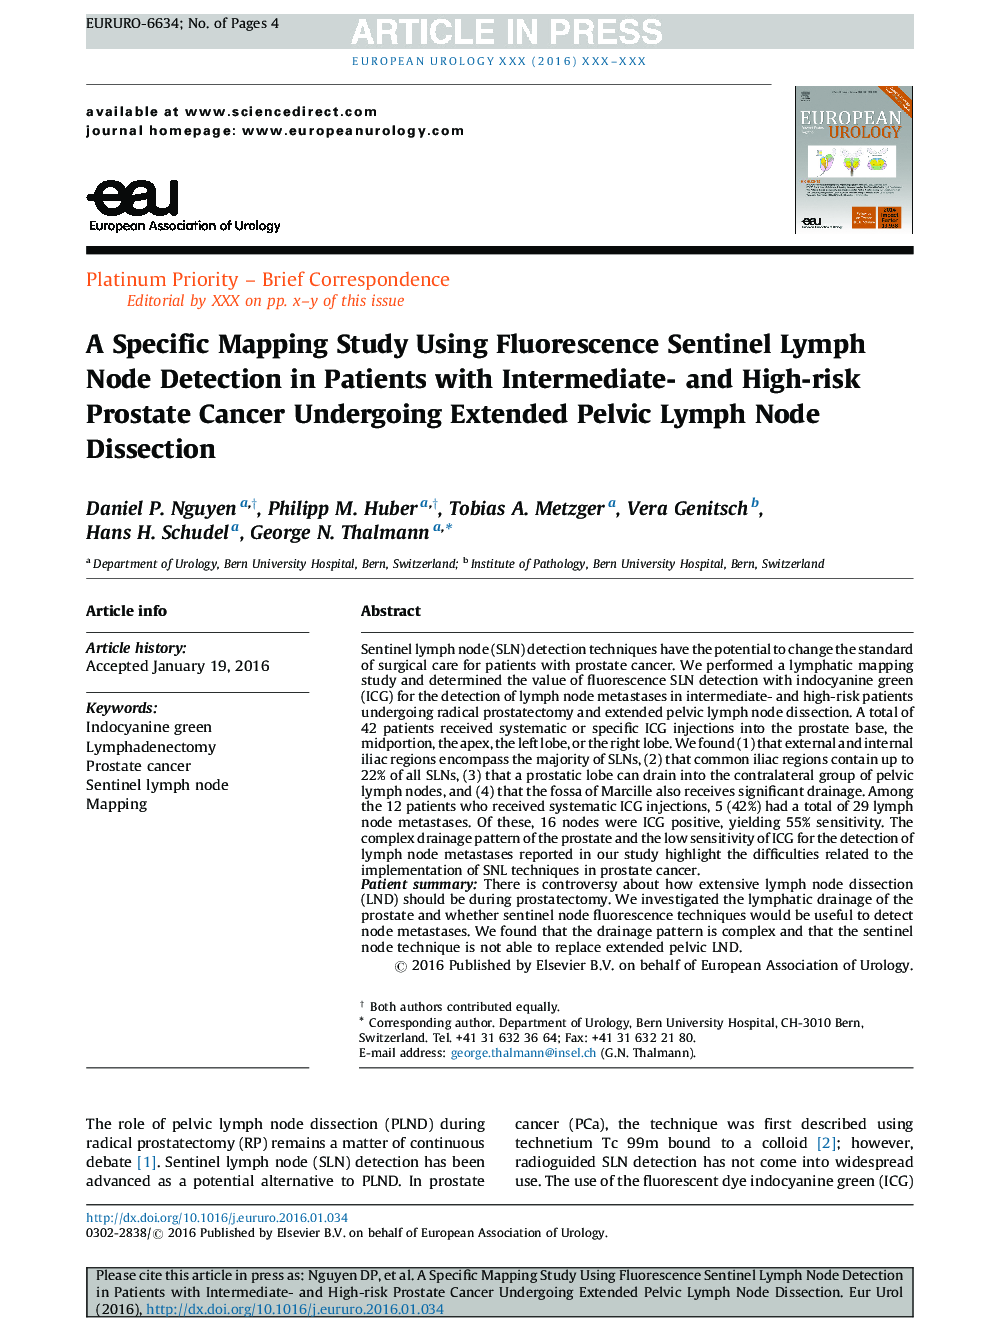 A Specific Mapping Study Using Fluorescence Sentinel Lymph Node Detection in Patients with Intermediate- and High-risk Prostate Cancer Undergoing Extended Pelvic Lymph Node Dissection